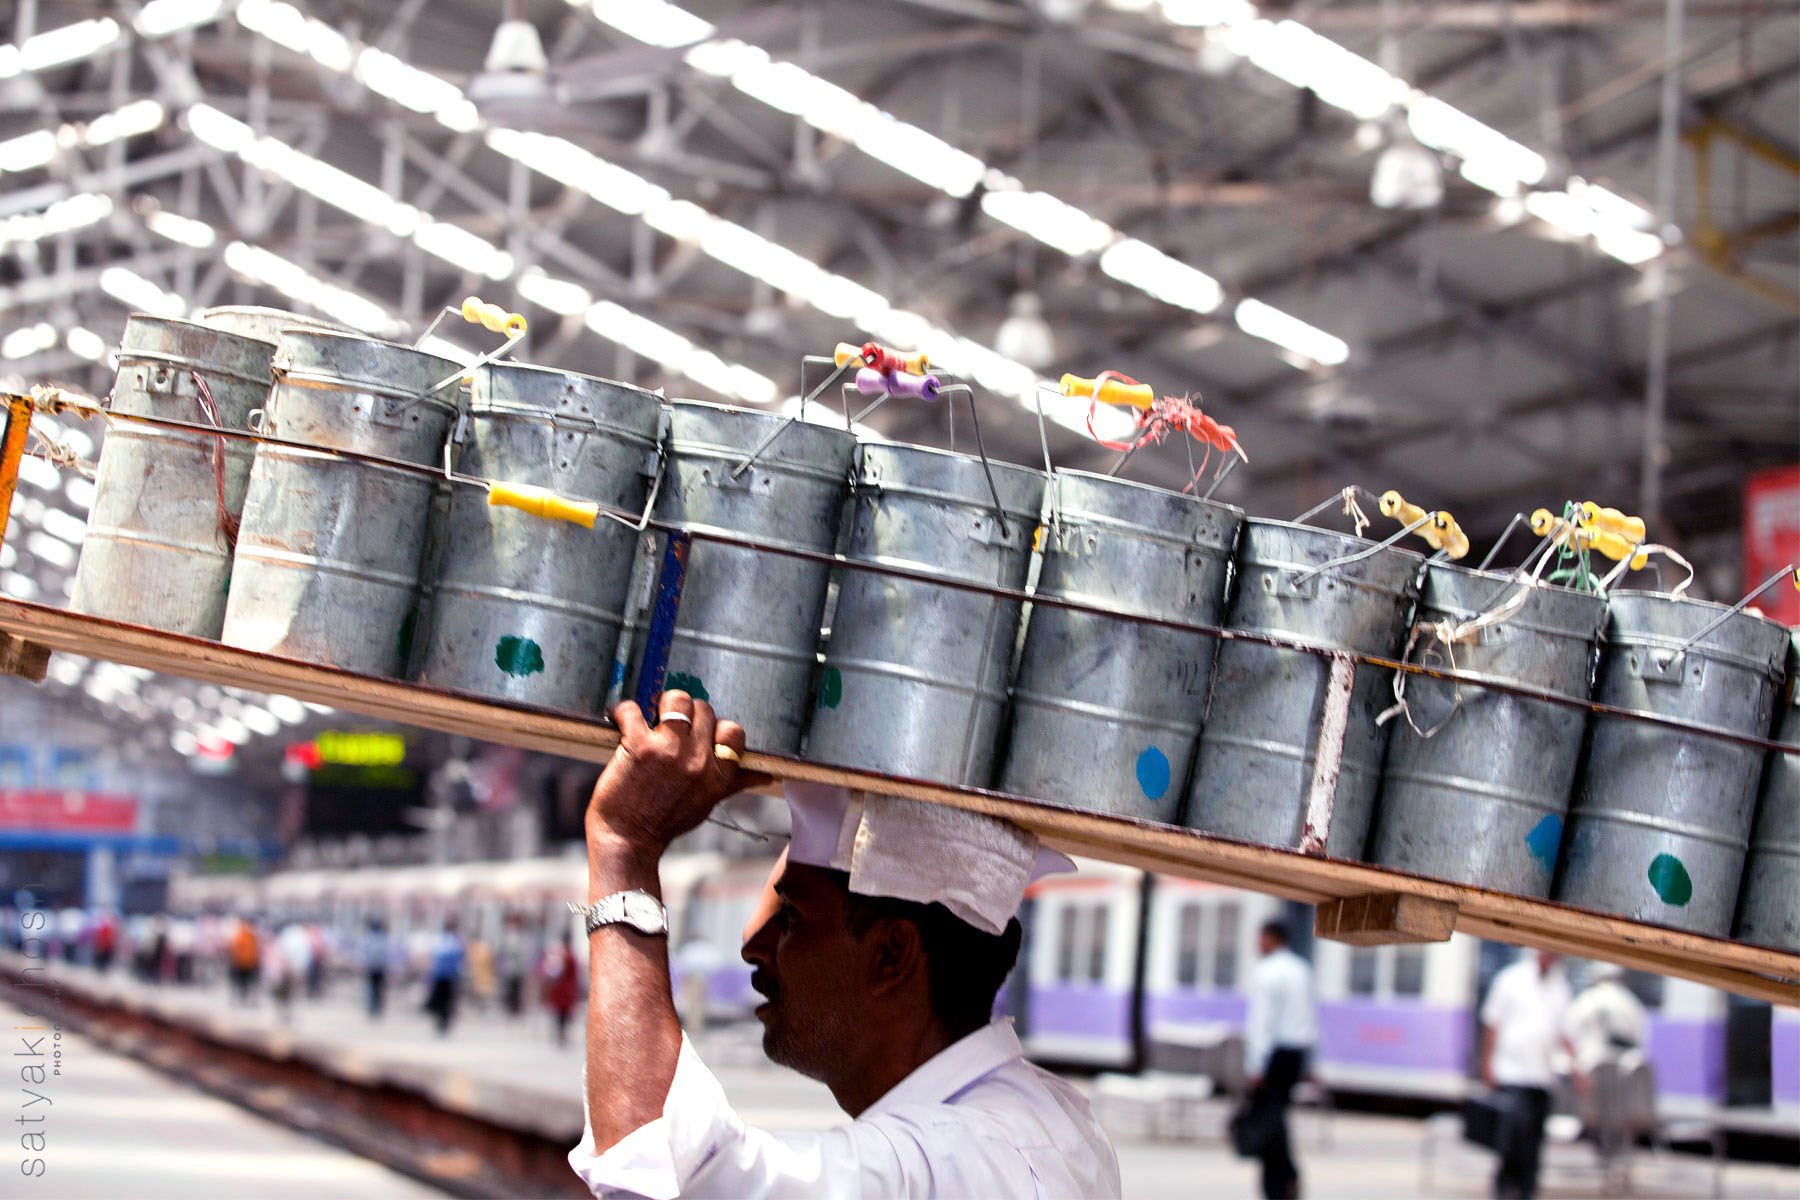 [Watch/Read] Crusading Against Hunger, Mumbai Dabbawalas Come Up With Roti Bank